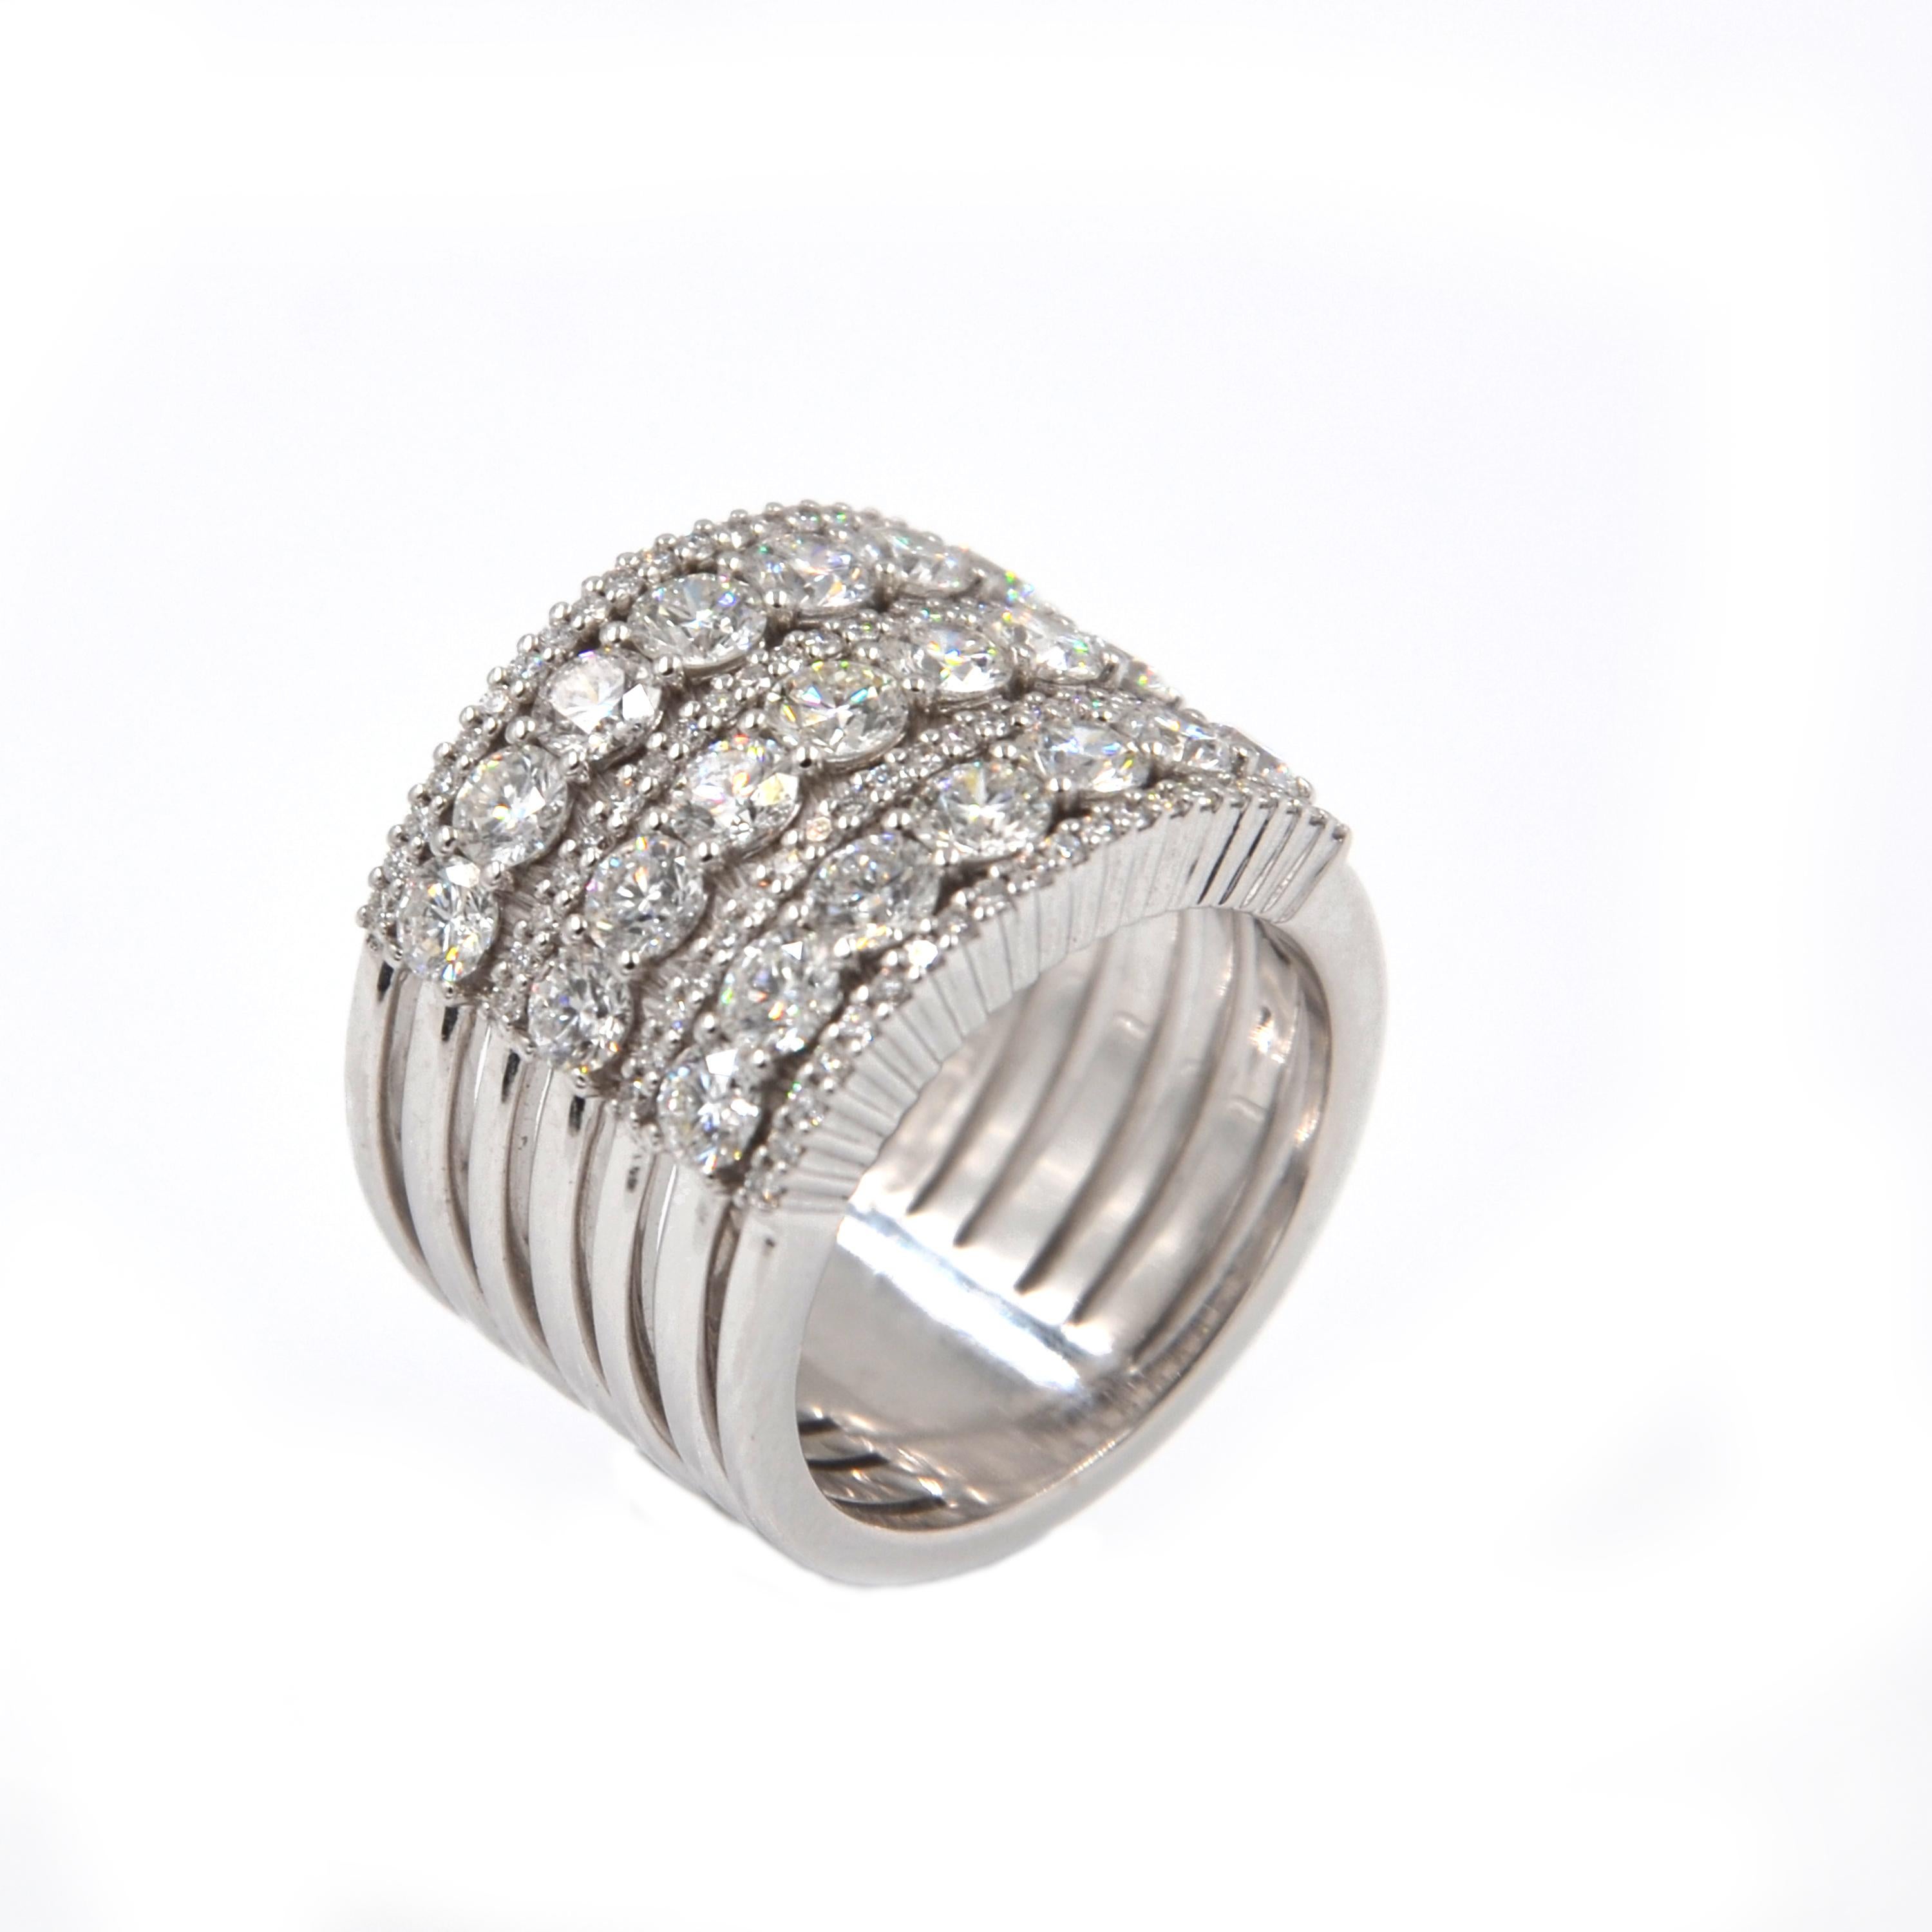 18kt White Gold White Diamonds Garavelli Large Band Ring from Principessa Sofia Collection, in size 54, can be ordered anysize.
Matching bracelet and earrings also available upon order.
18KT GOLD  gr : 16.00
WHITE DIAMONDS ct : 2.99